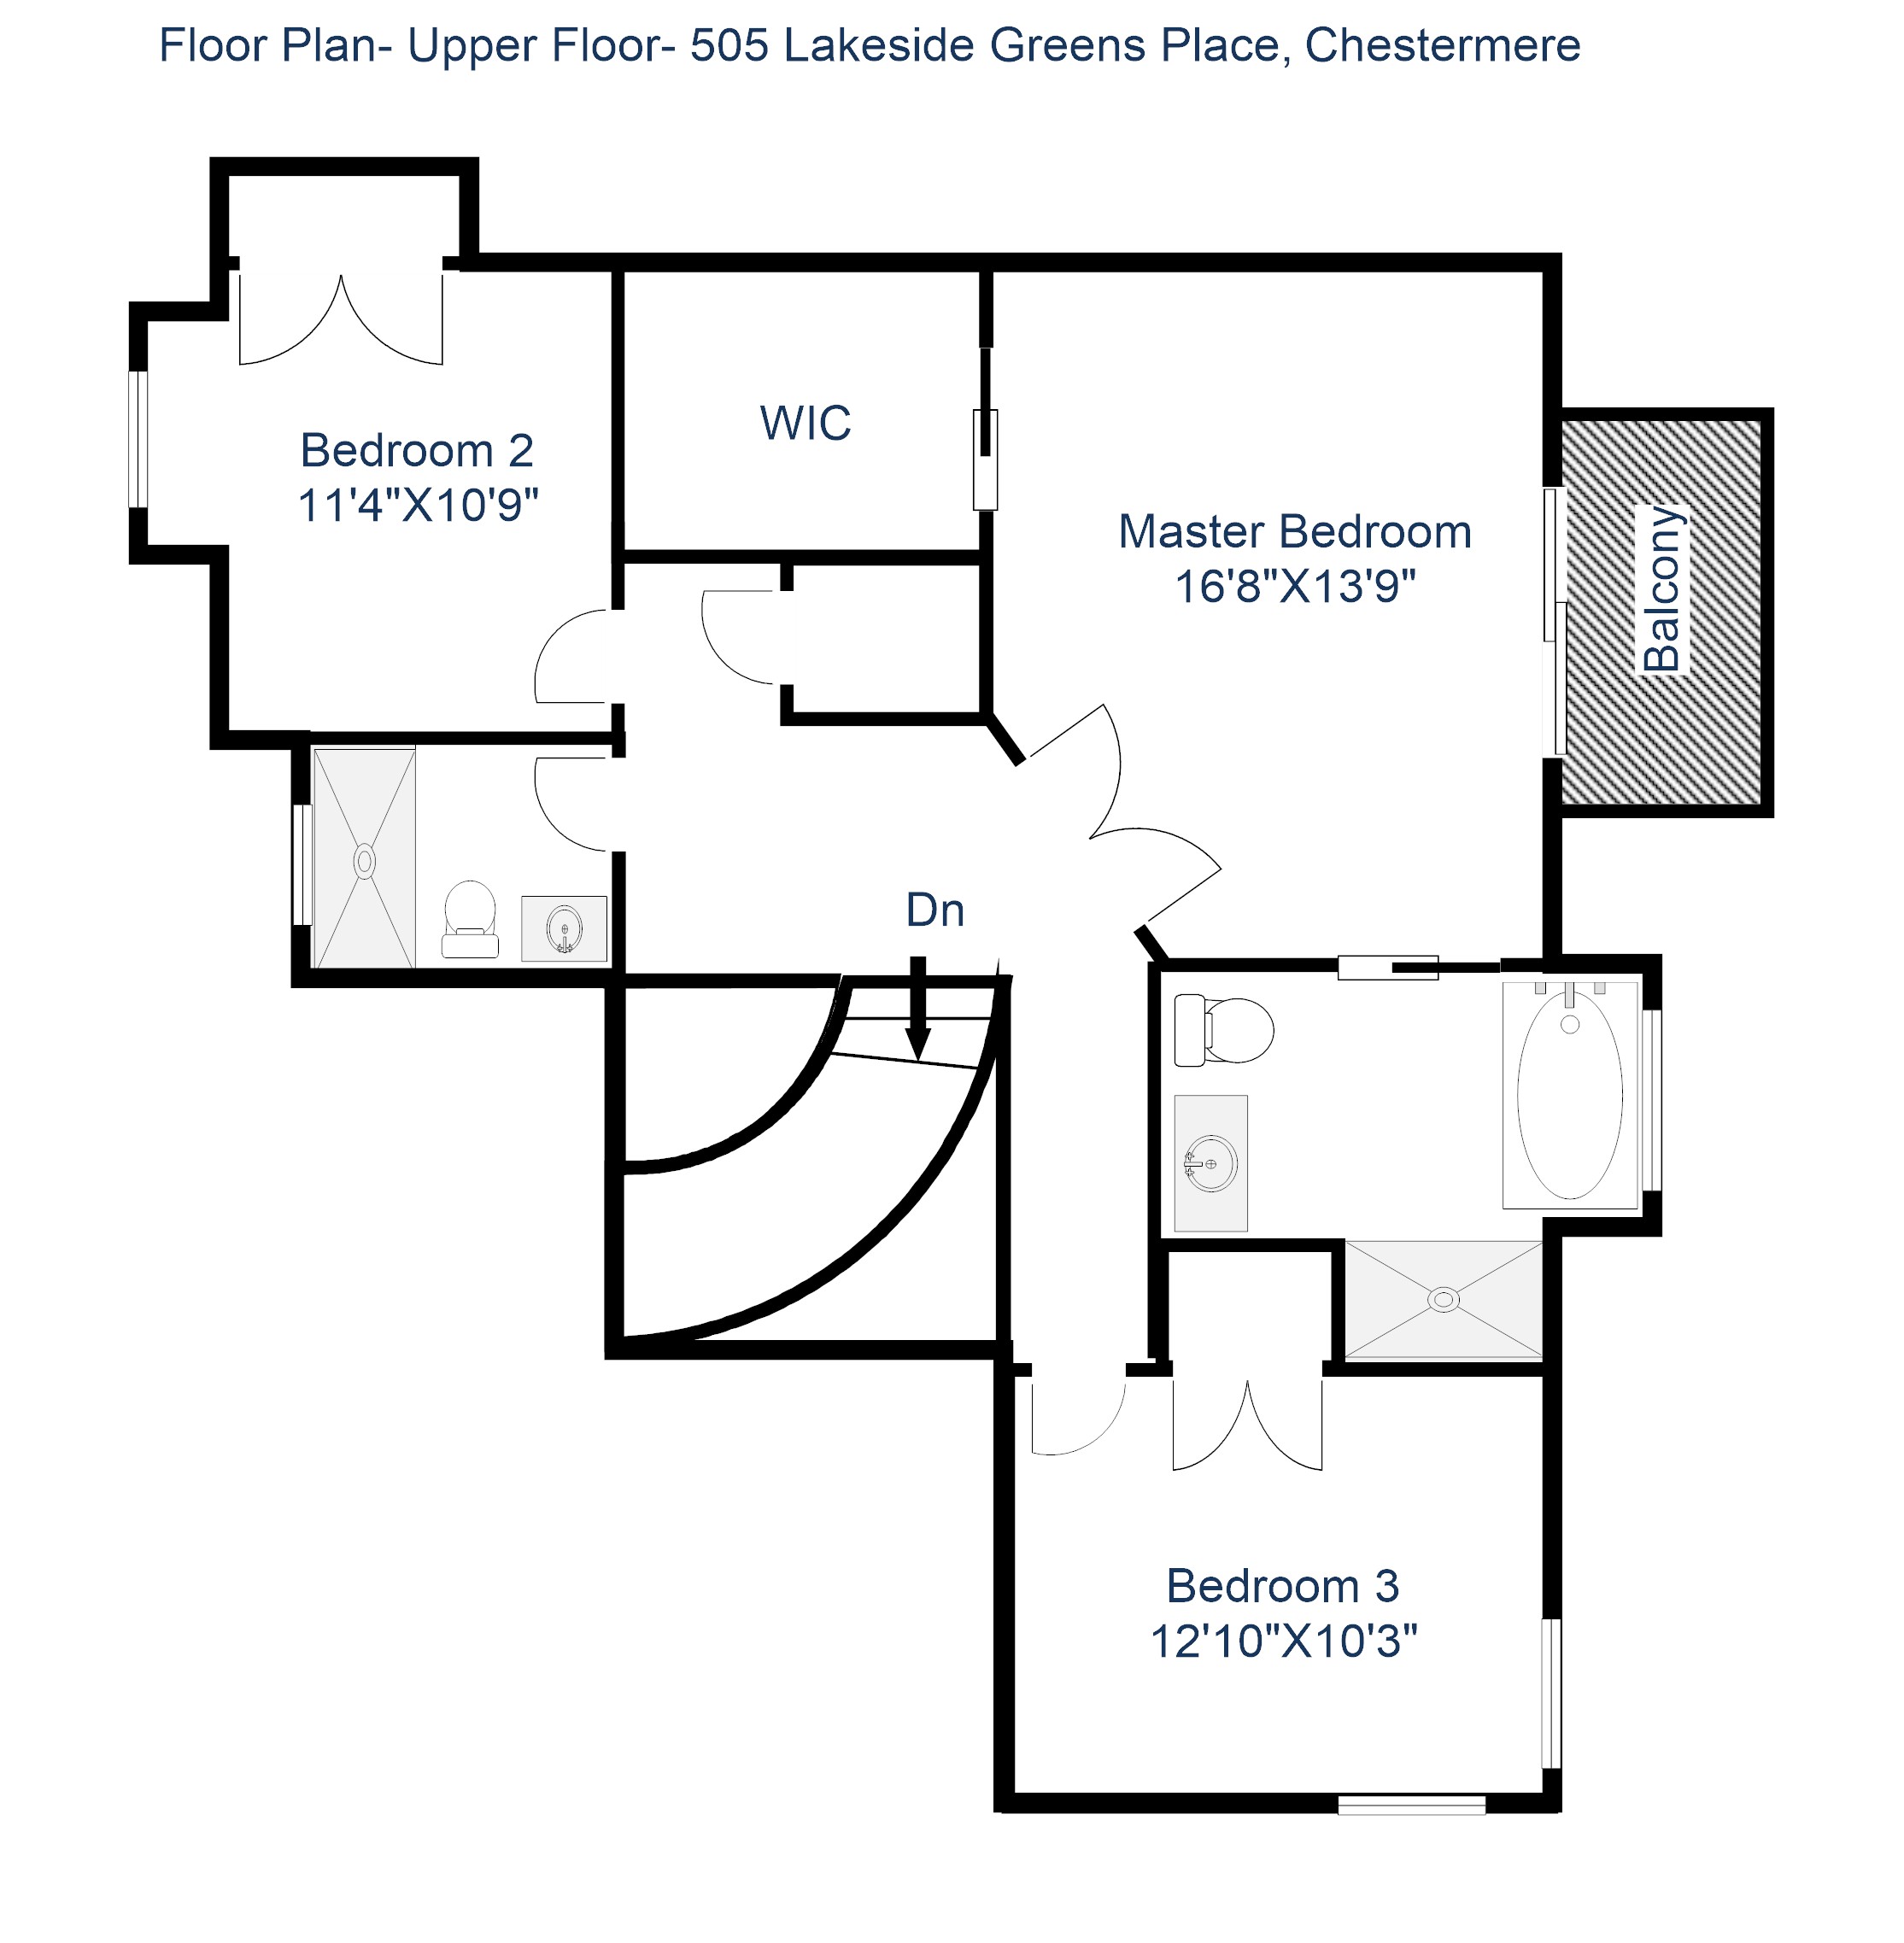 505 Lakeside Greens Place Second Floor Plan